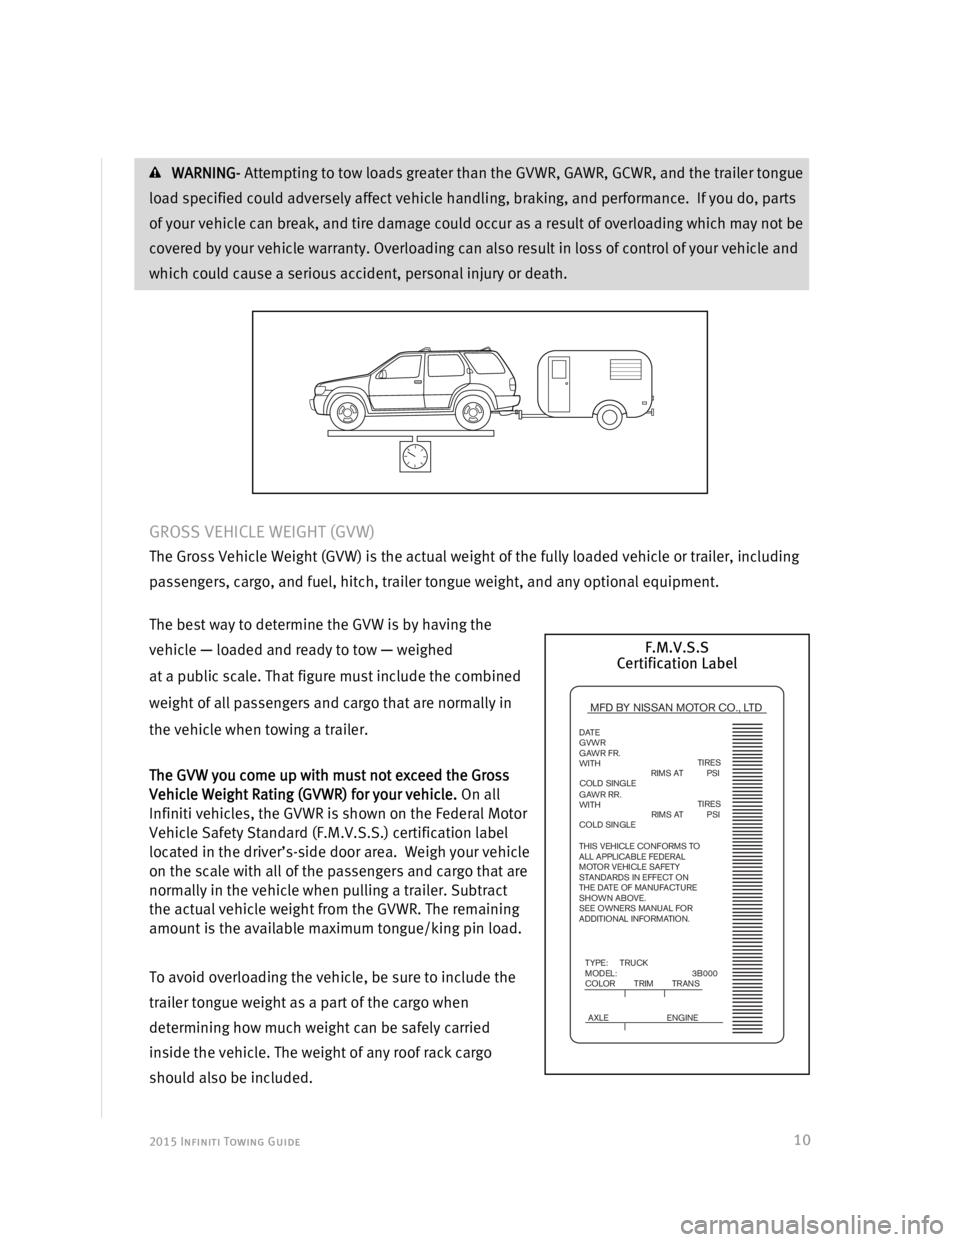 INFINITI QX60 2015  Towing Guide  2015 Infiniti Towing Guide  
 
 
10
 WARNING- Attempting to tow loads greater than the GVWR, GAWR, GCWR, and the trailer tongue 
load specified could adversely affect vehicle handling, braking, and p